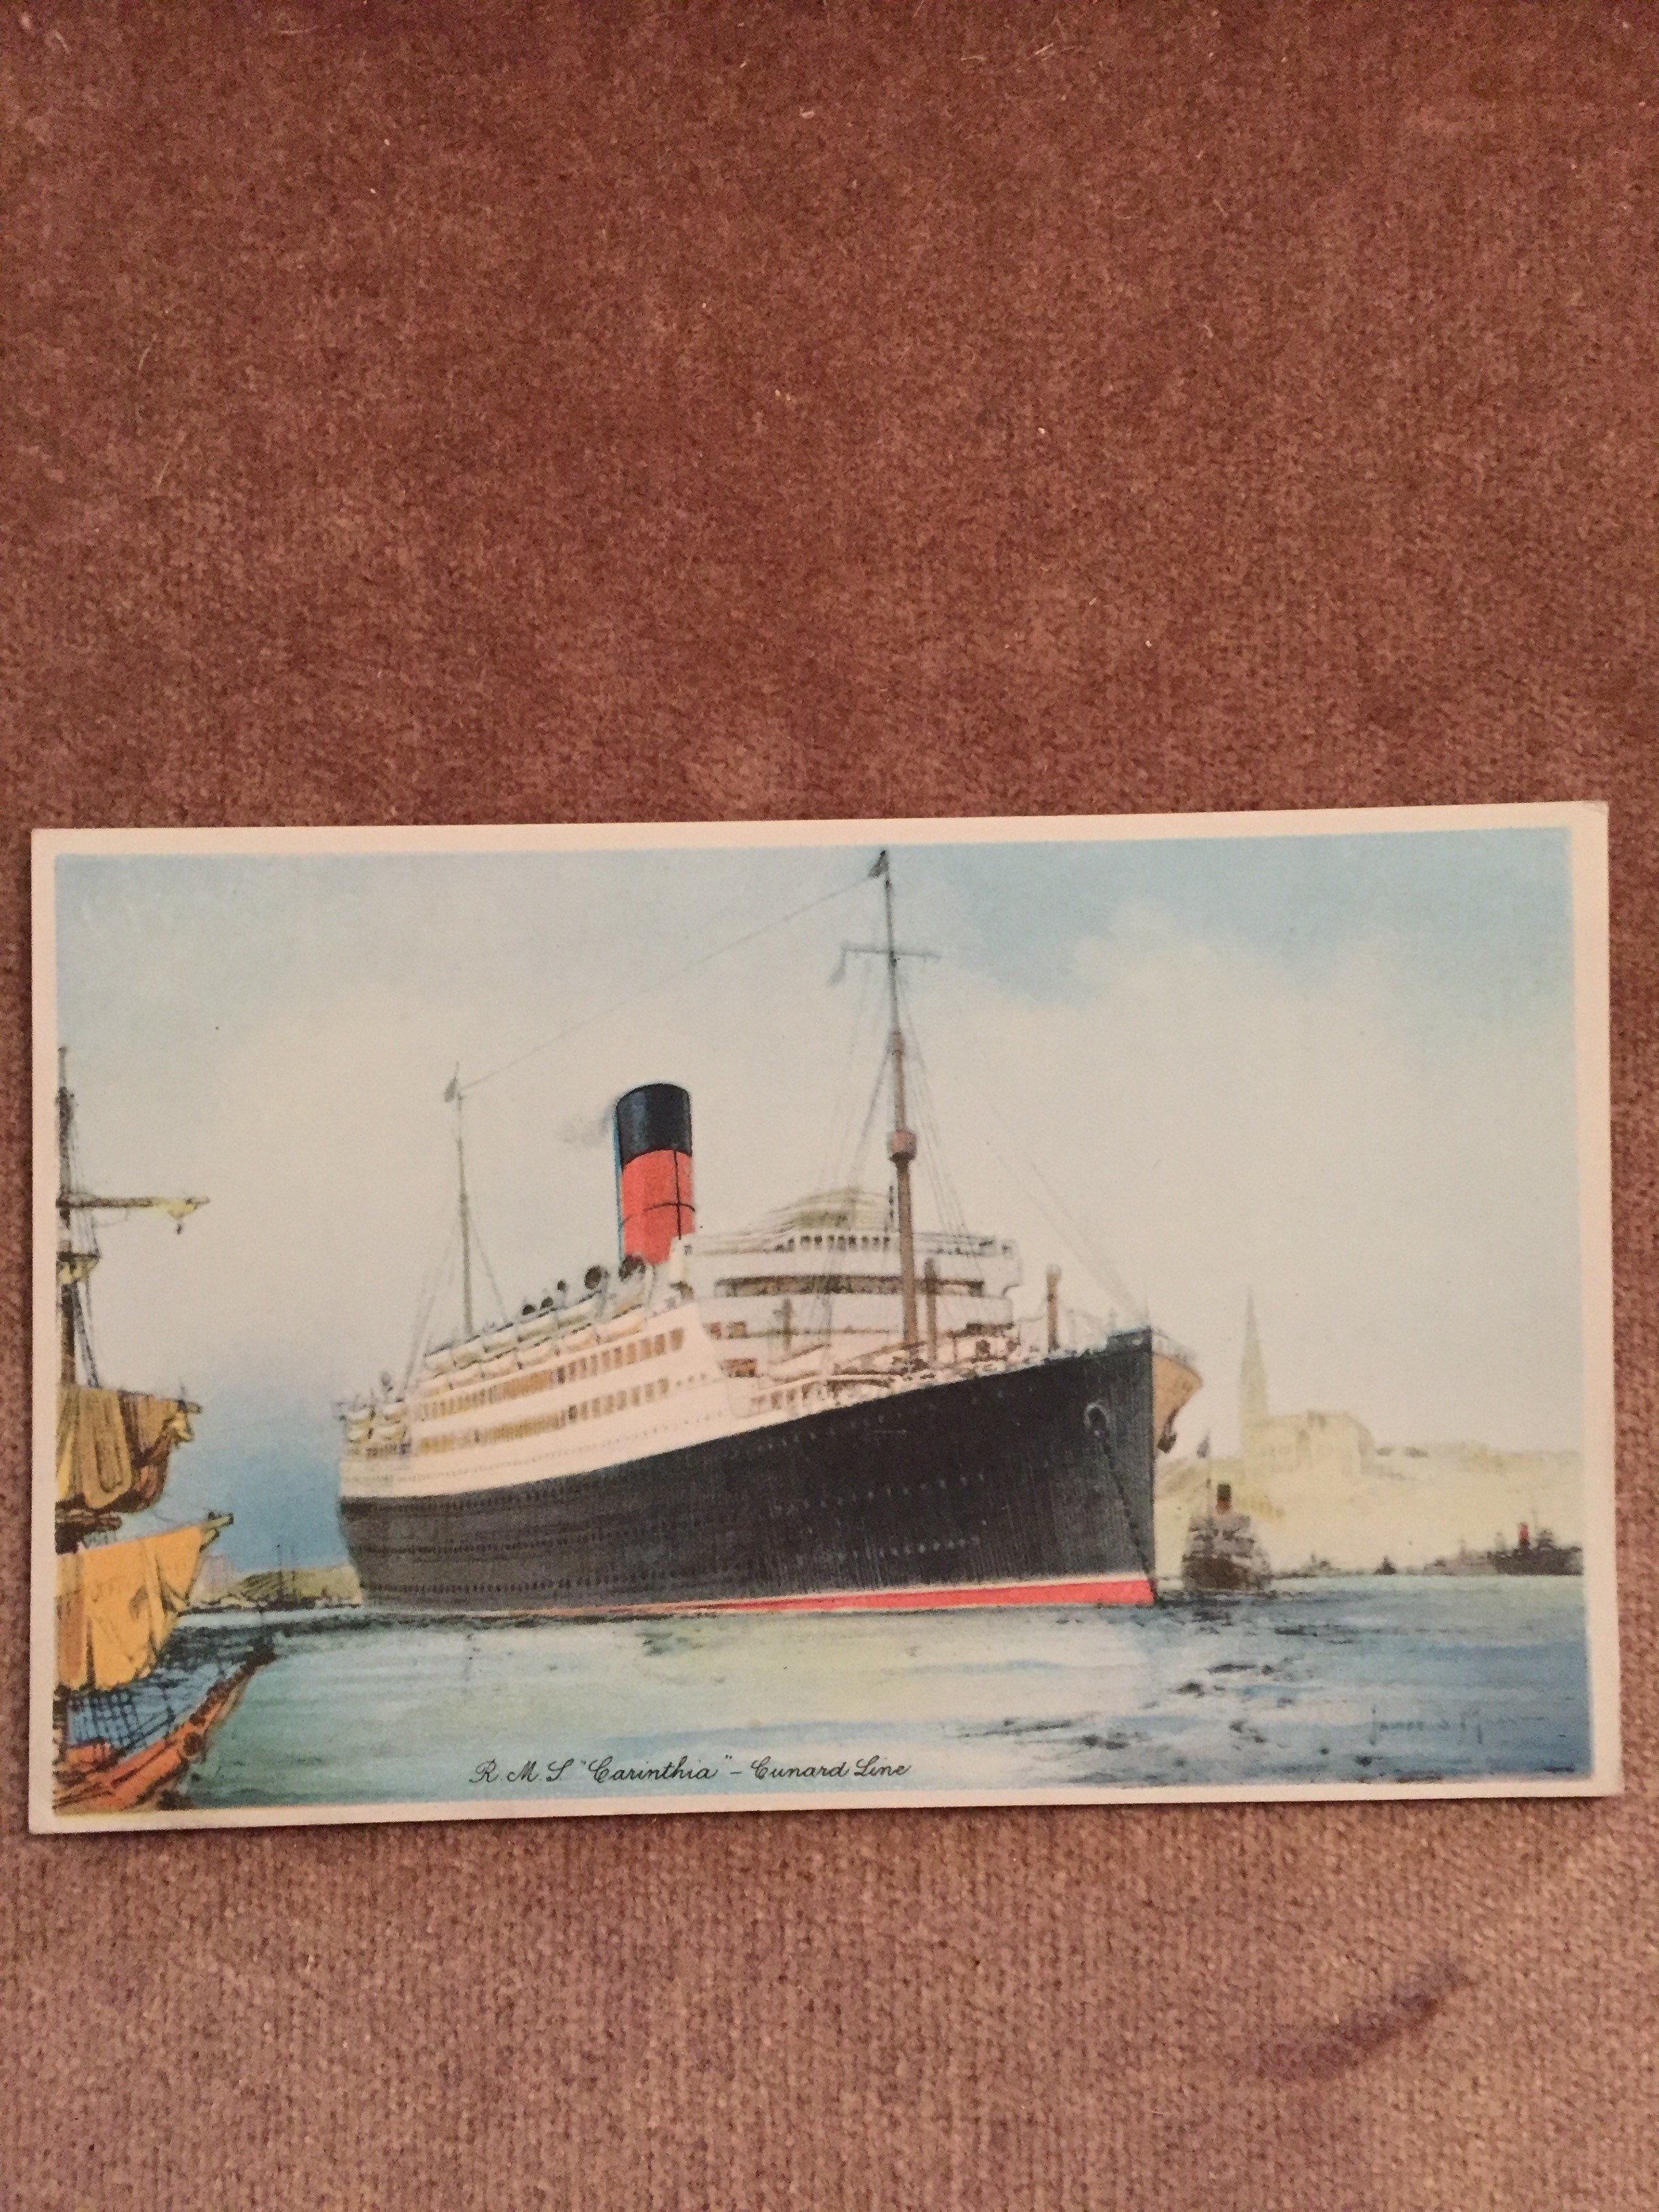 UNUSED COLOUR POSTCARD FROM THE OLD CUNARD LINE VESSEL THE CARINTHIA